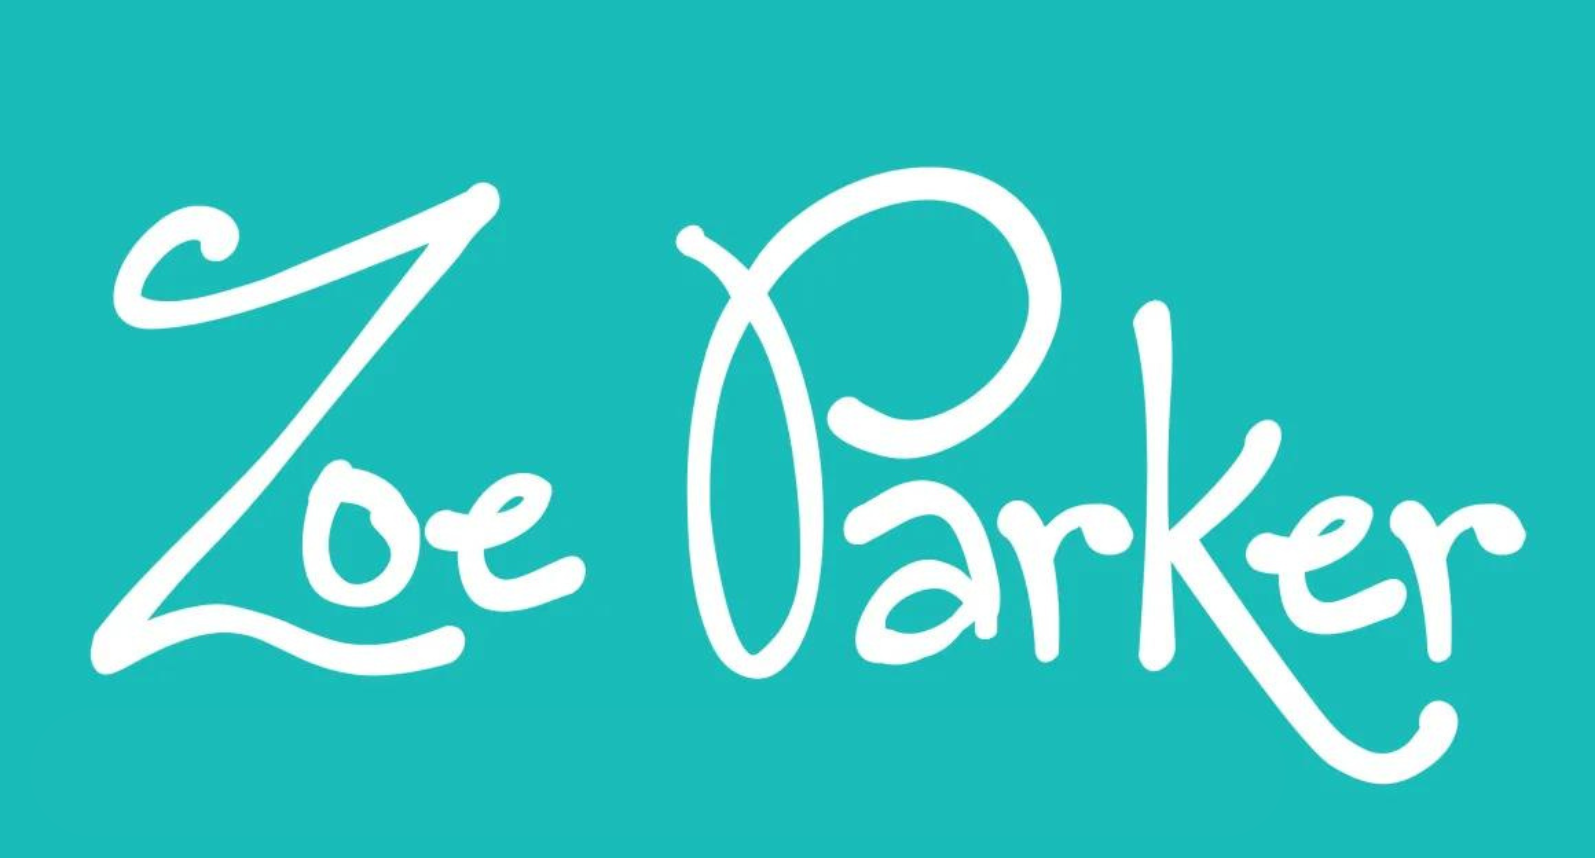 zoe parker with a teal background